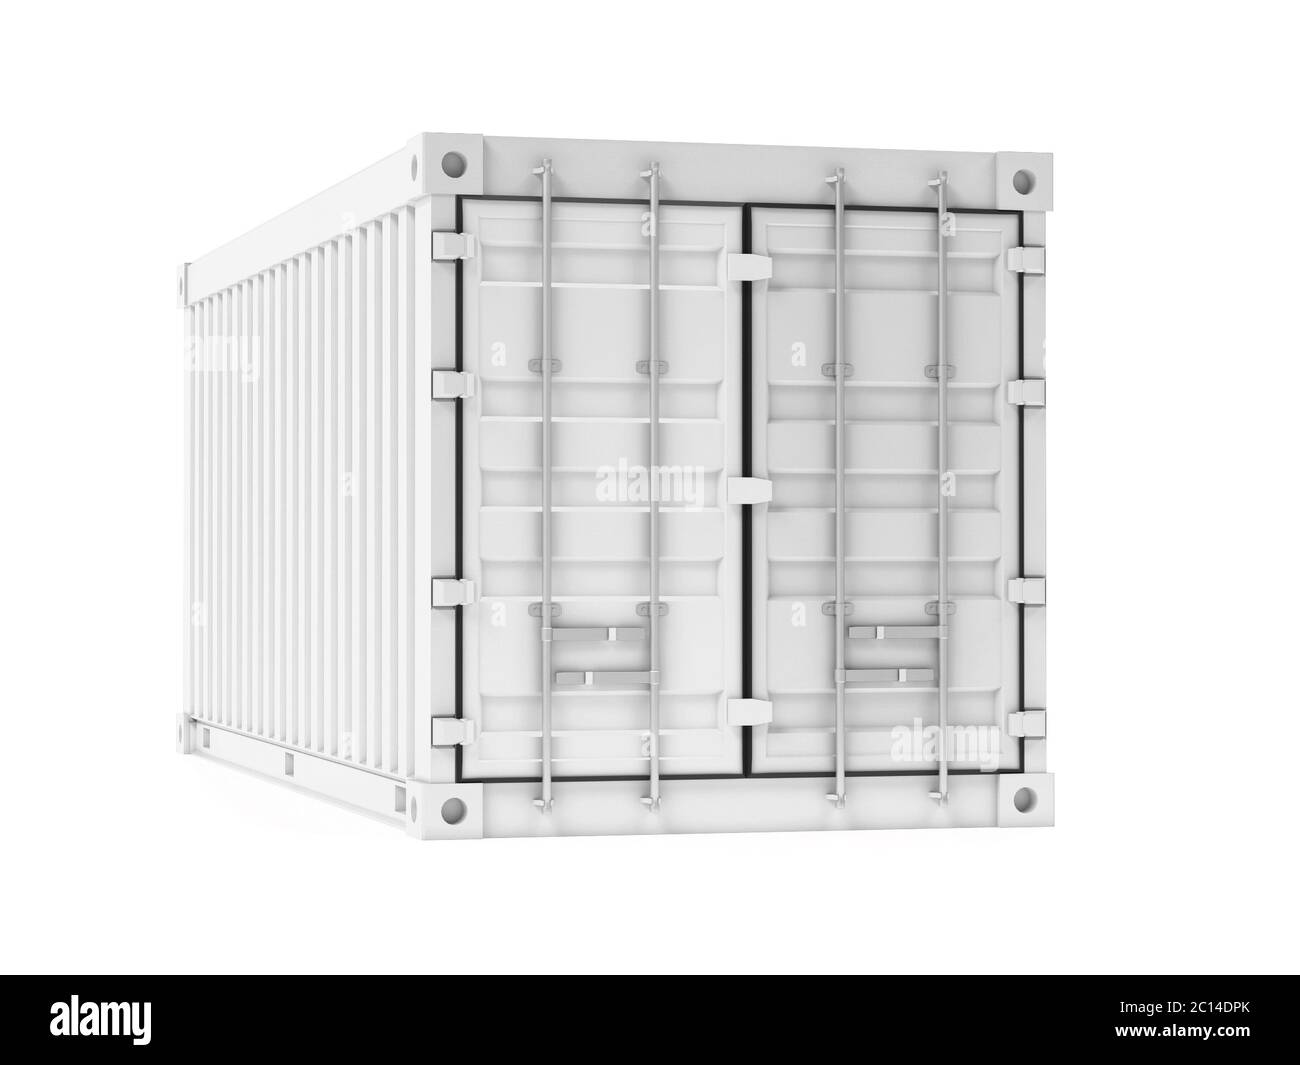 Shipping freight container. White intermodal container. 3d rendering illustration isolated on white background Stock Photo